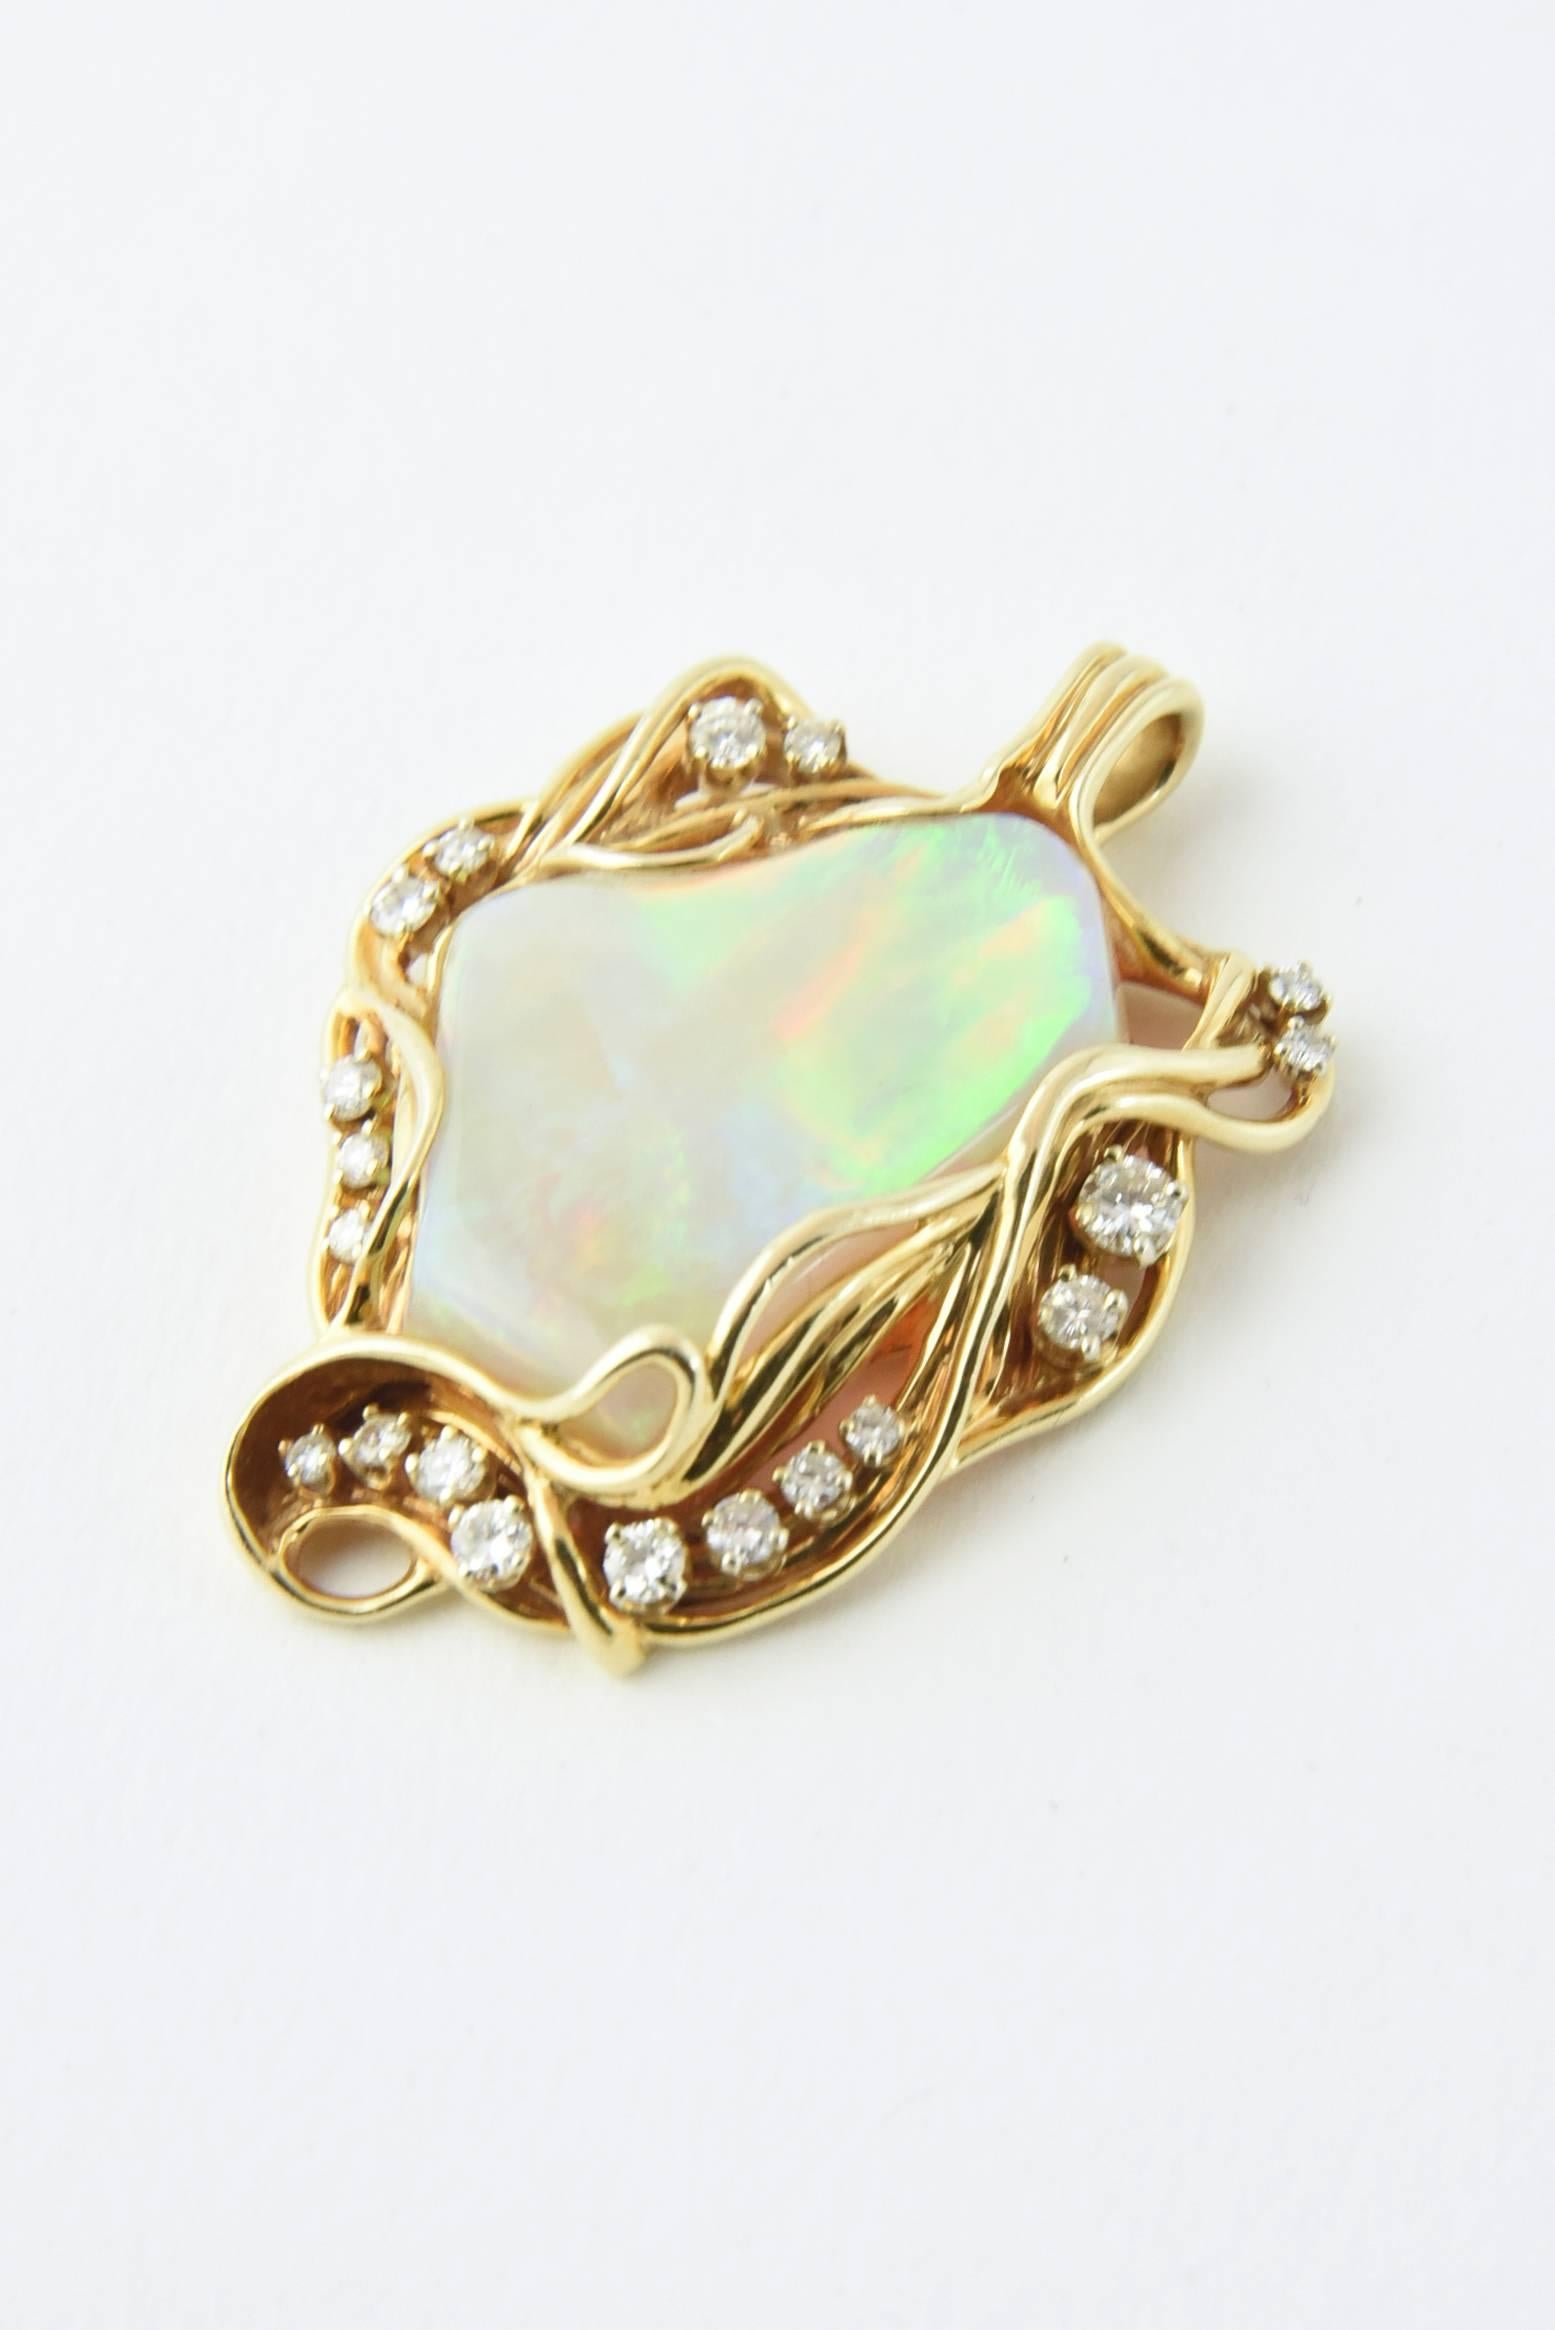 1960s Custom pendant made to showcase this fine quality gray opal which features blue, green, red & yellow broad flashes.  This gorgeous Australian opal in mounted in a handmade 14k gold frame with diamond accents.